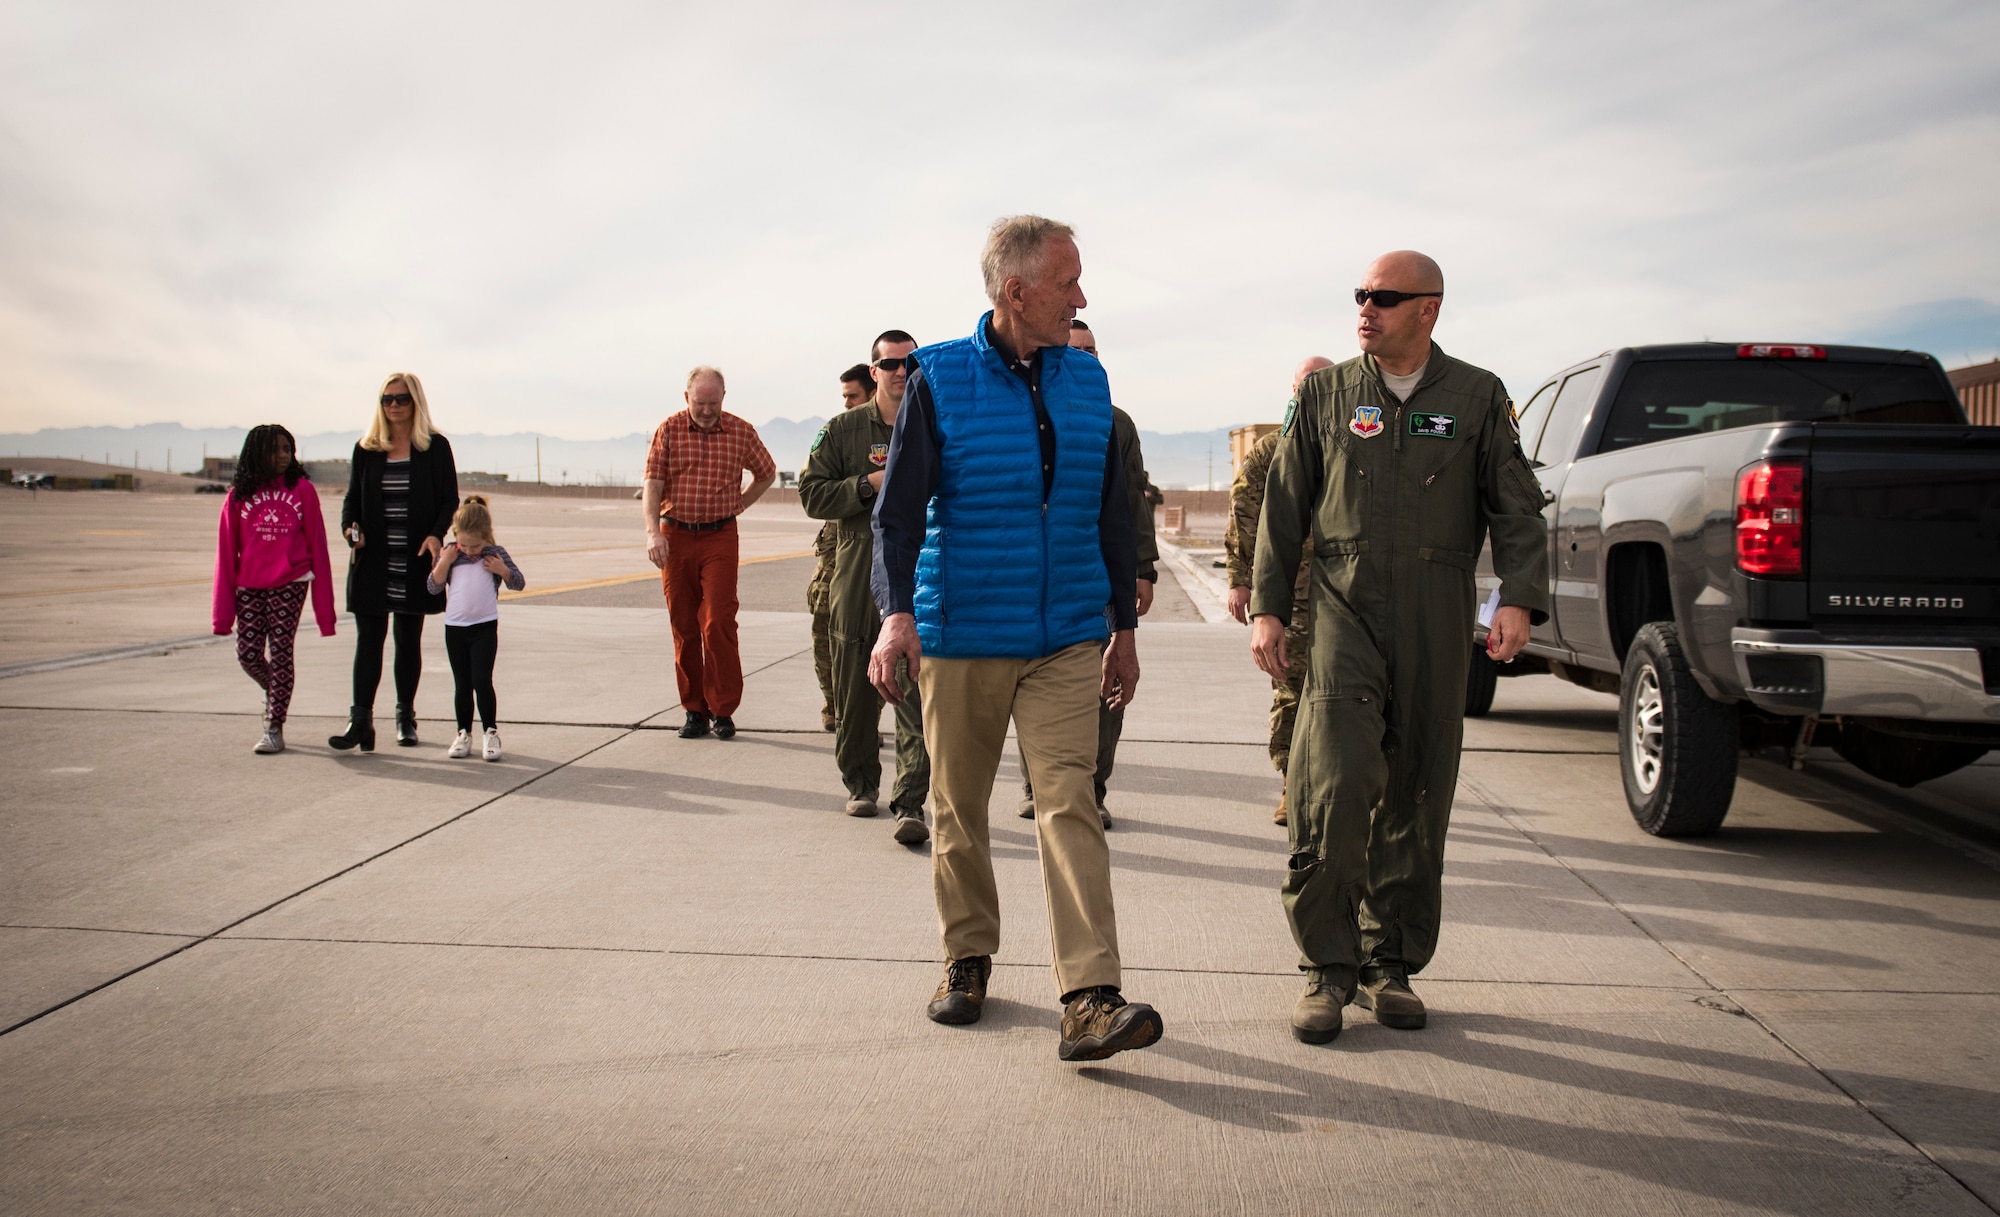 The Cottam family speaks with 66th Rescue Squadron Airmen during a squadron tour at Nellis Air Force Base, Nevada, Nov. 16, 2018. The 66th RQS rescued Dr. Daniel Cottam, his wife and his uncle when Cottam was severely injured after falling during a hike near Zion Canyon, Utah. (U.S. Air Force photo by Airman 1st Class Andrew D. Sarver)